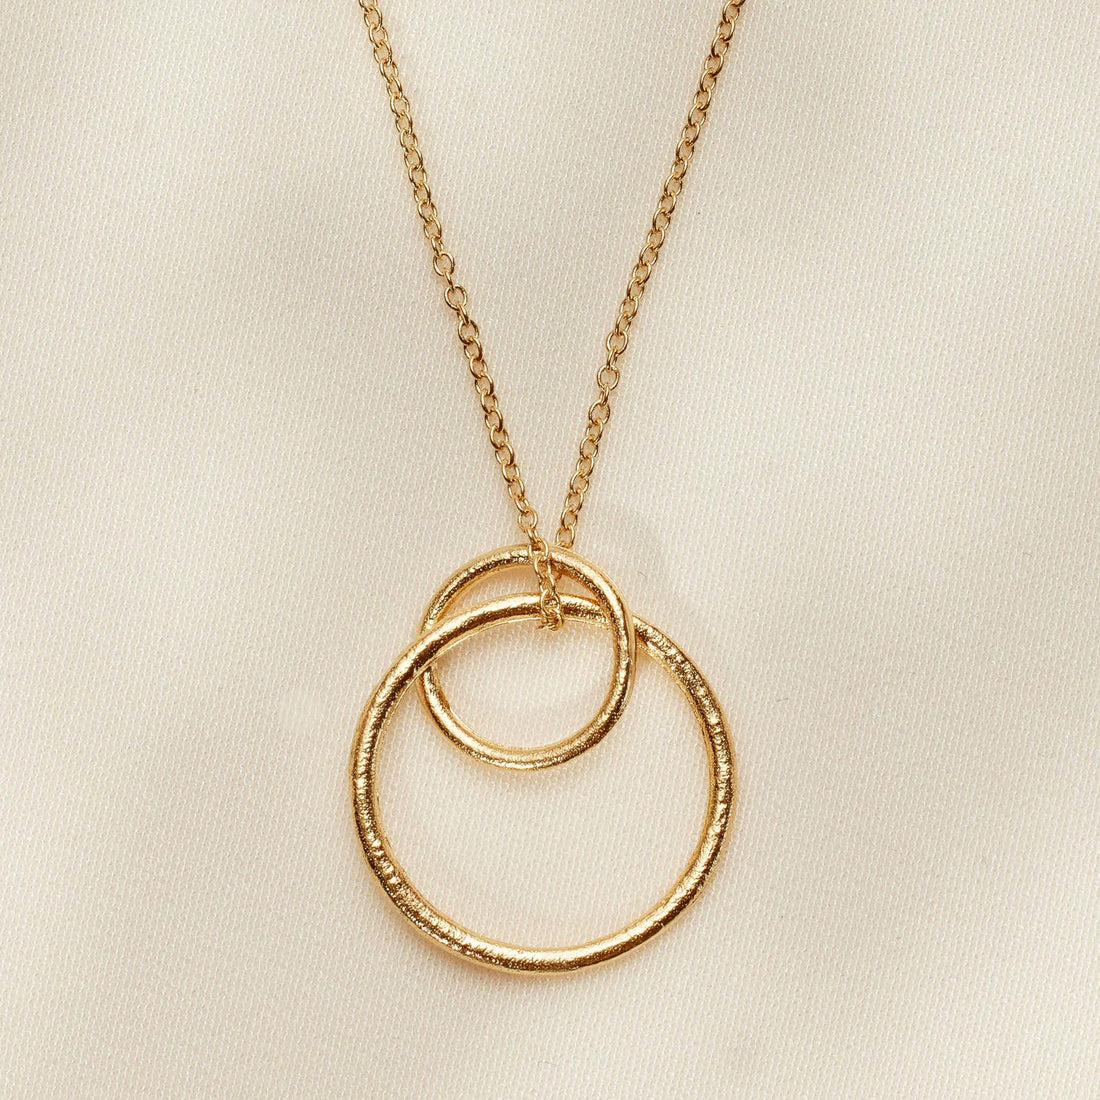 Selina Necklace | Jewelry Gold Gift Waterproof